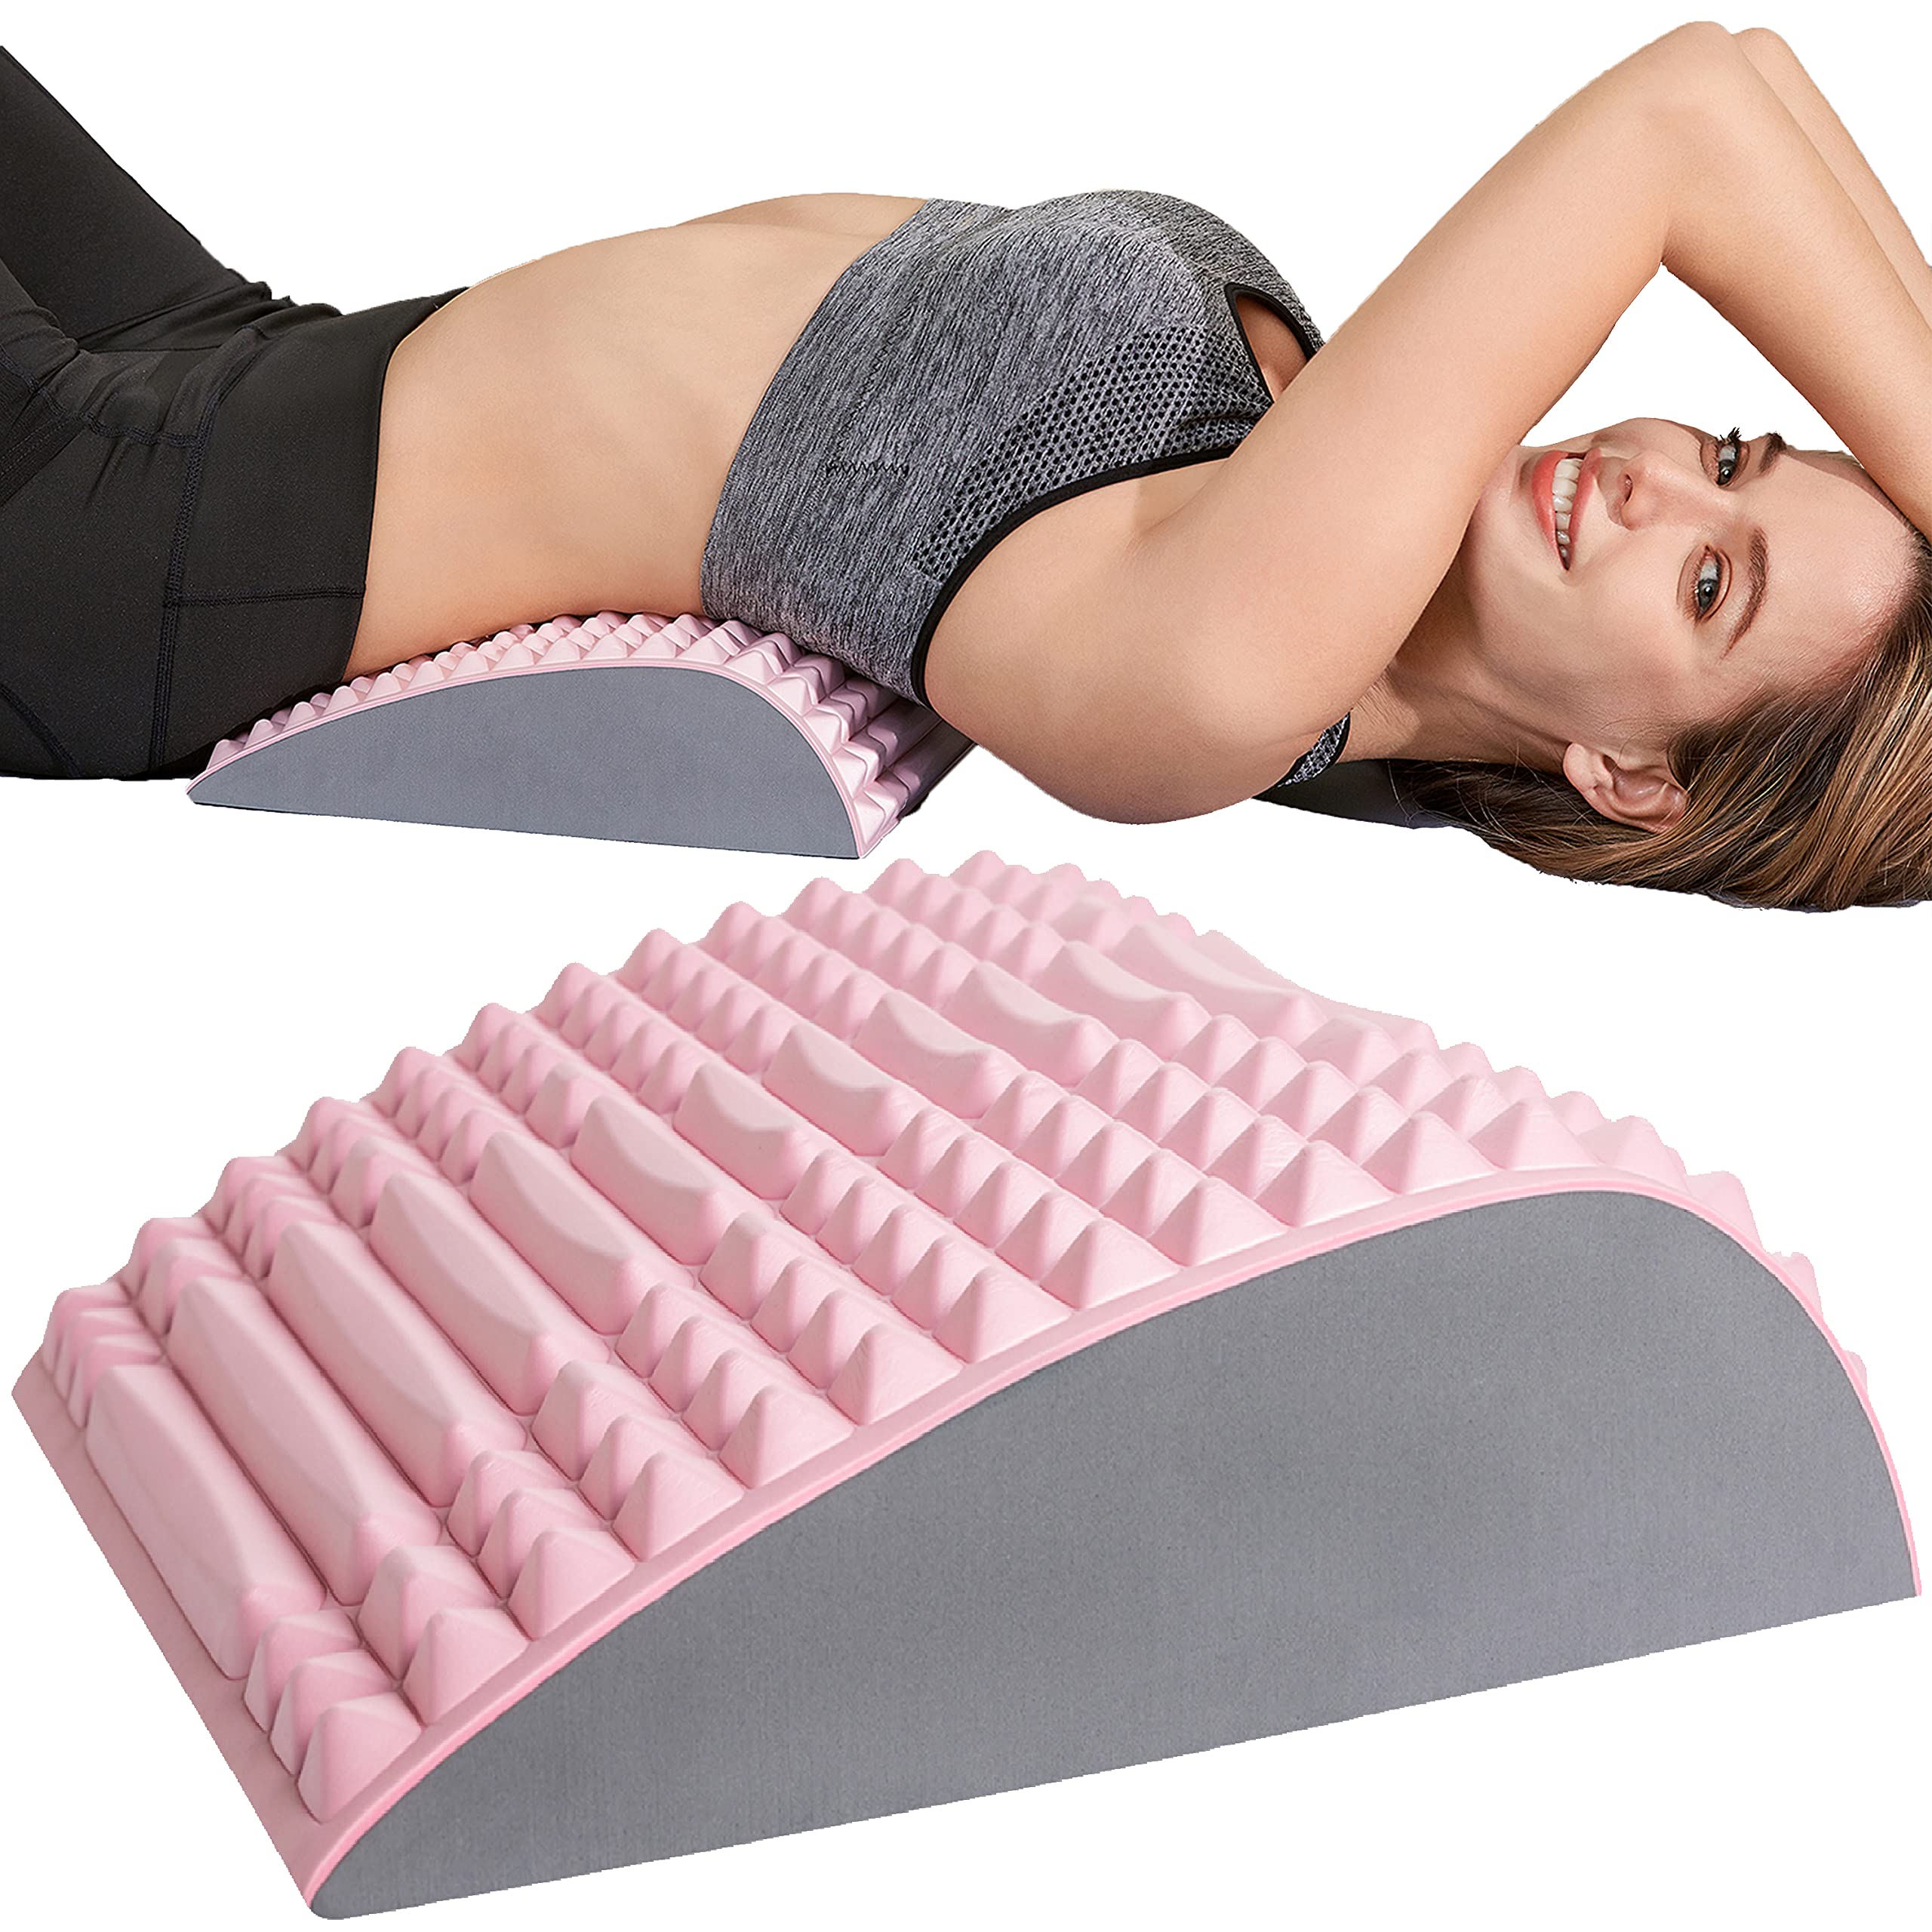 7 Lumbar Support Pillows Your Back Will Thank You For